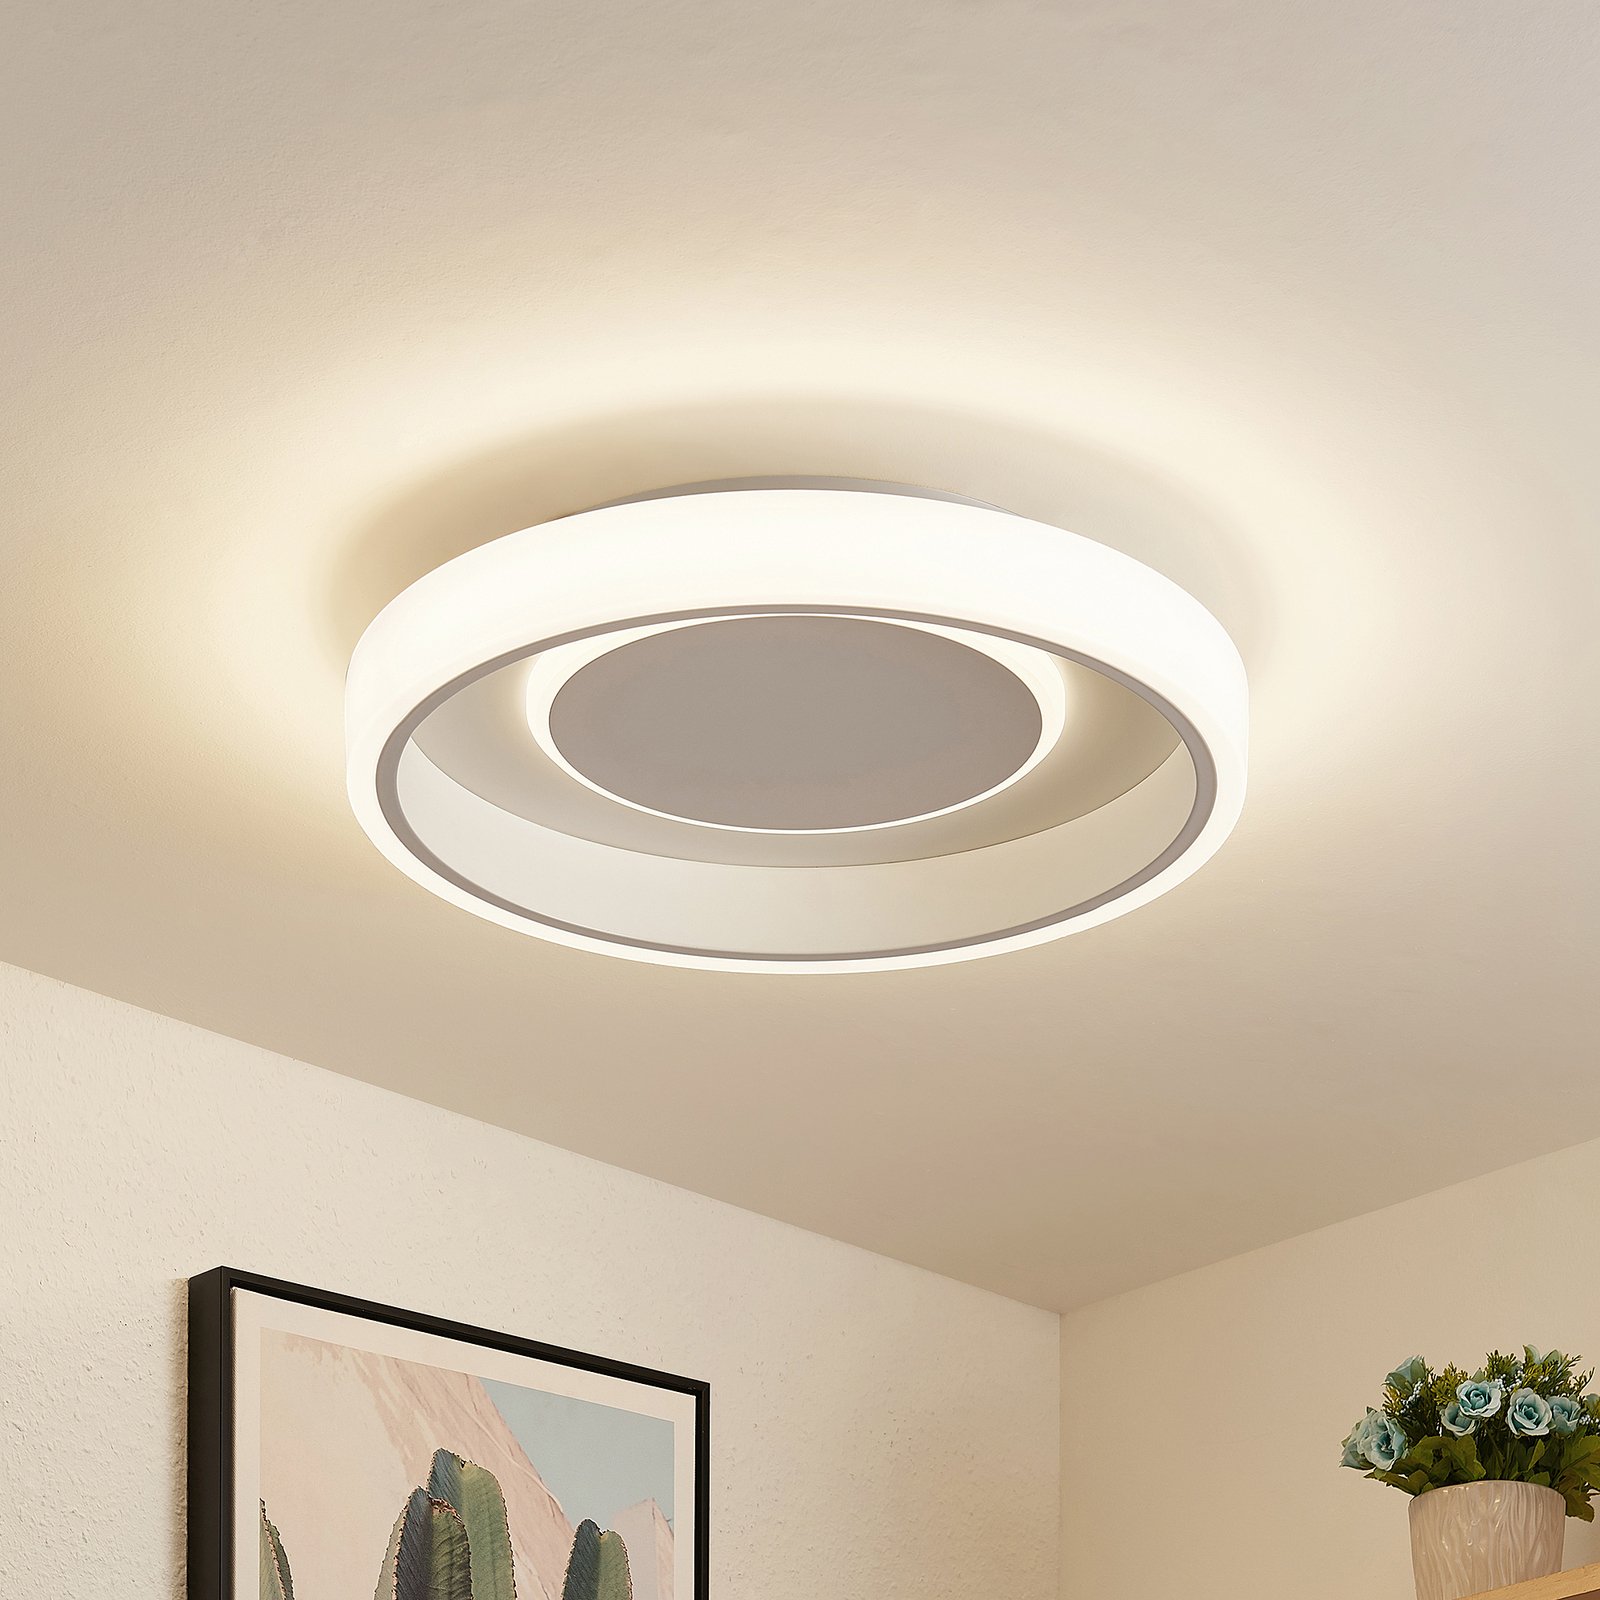 Lindby Wikani LED ceiling light, RGB, CCT dimmable